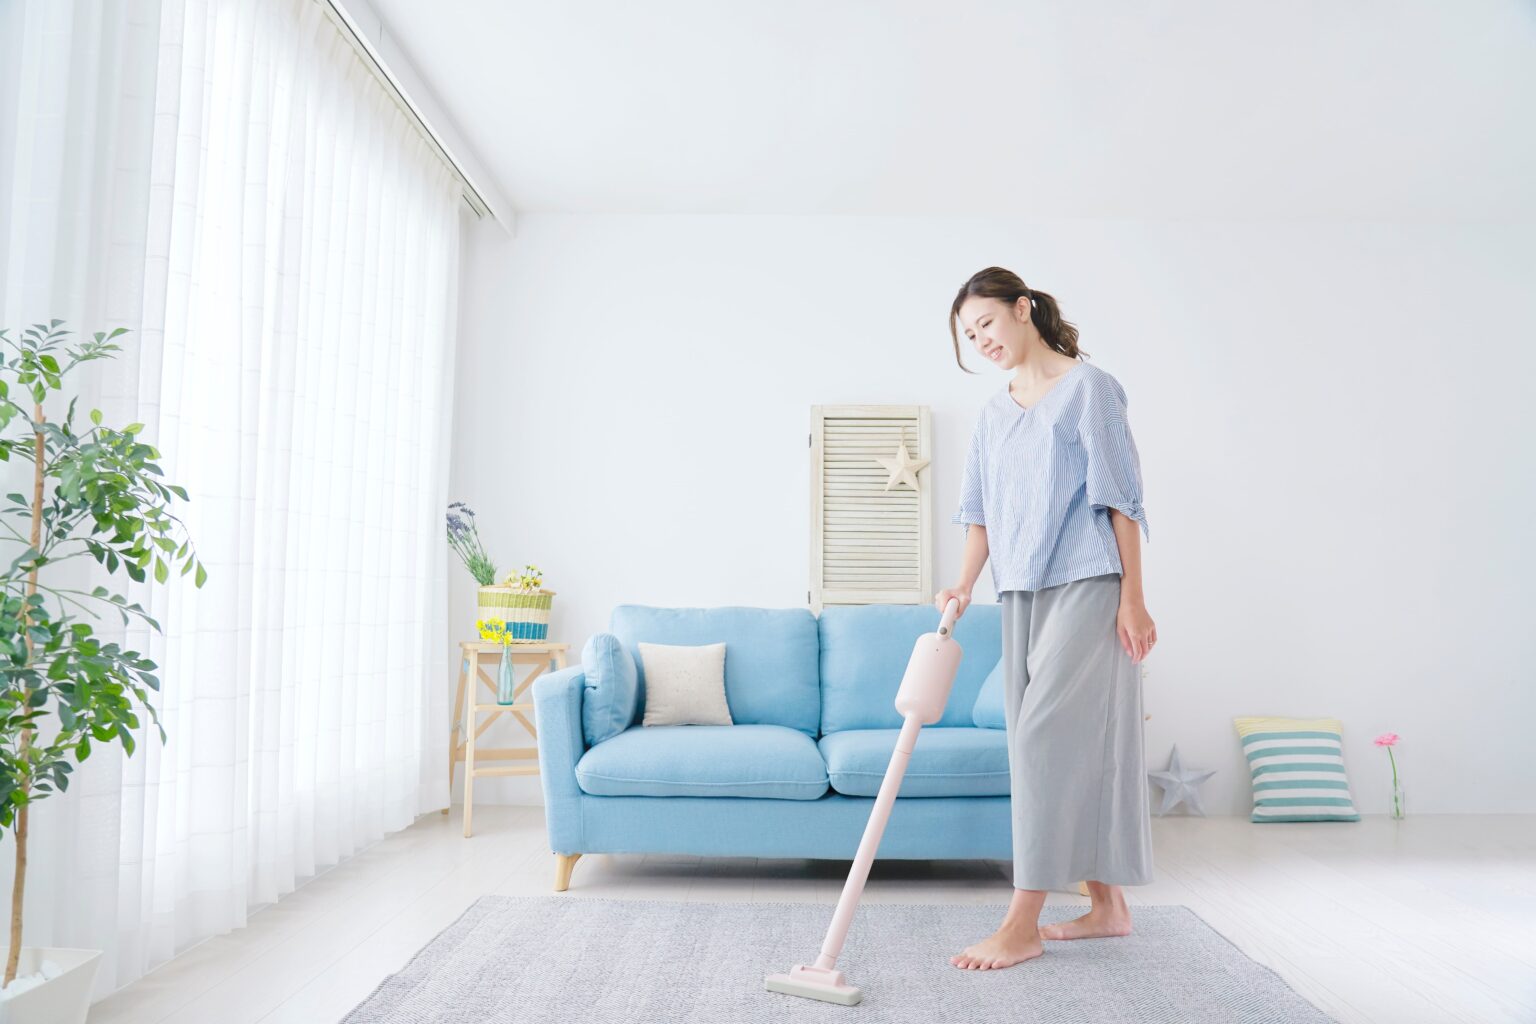 We’ve identified the best cordless stick vacuums of 2022. They are lightweight, powerful, versatile and easy to use.